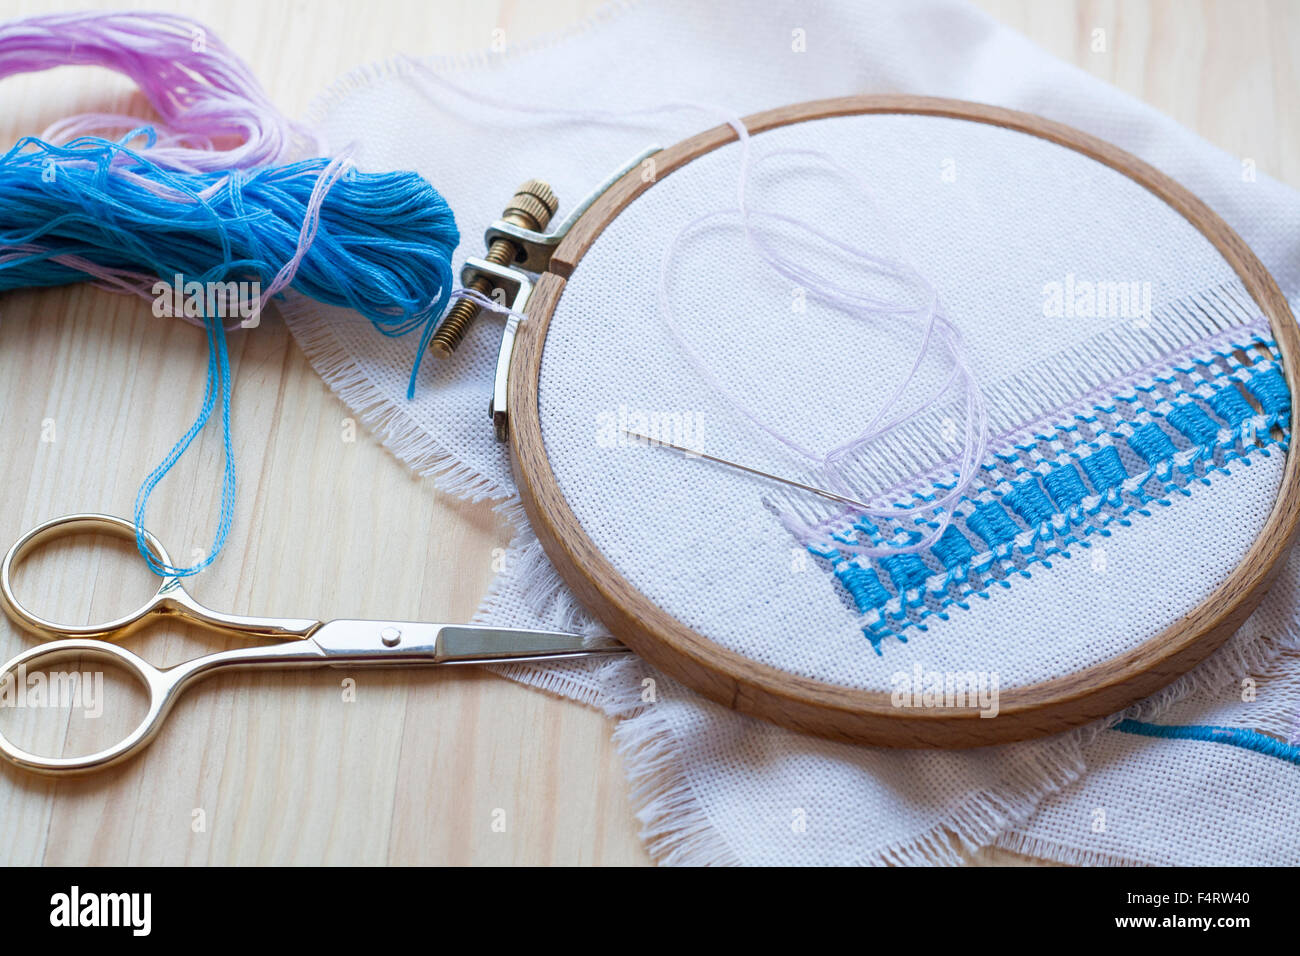 Openwork embroidery, incomplete work in progress and tools for embroidery Stock Photo